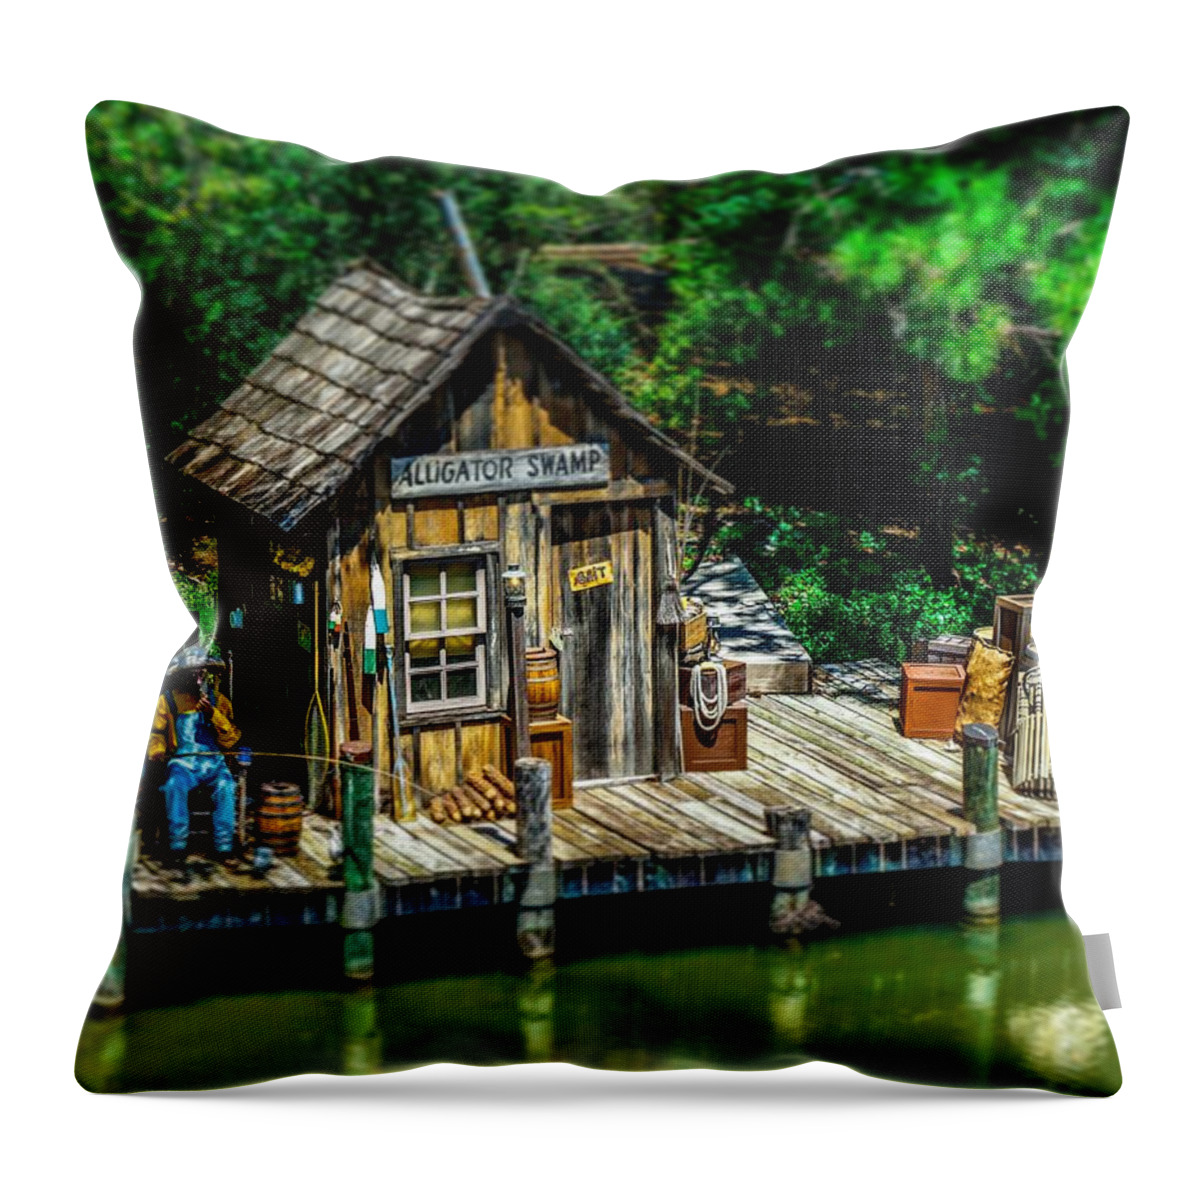  Throw Pillow featuring the photograph Alligator Swamp by Rodney Lee Williams